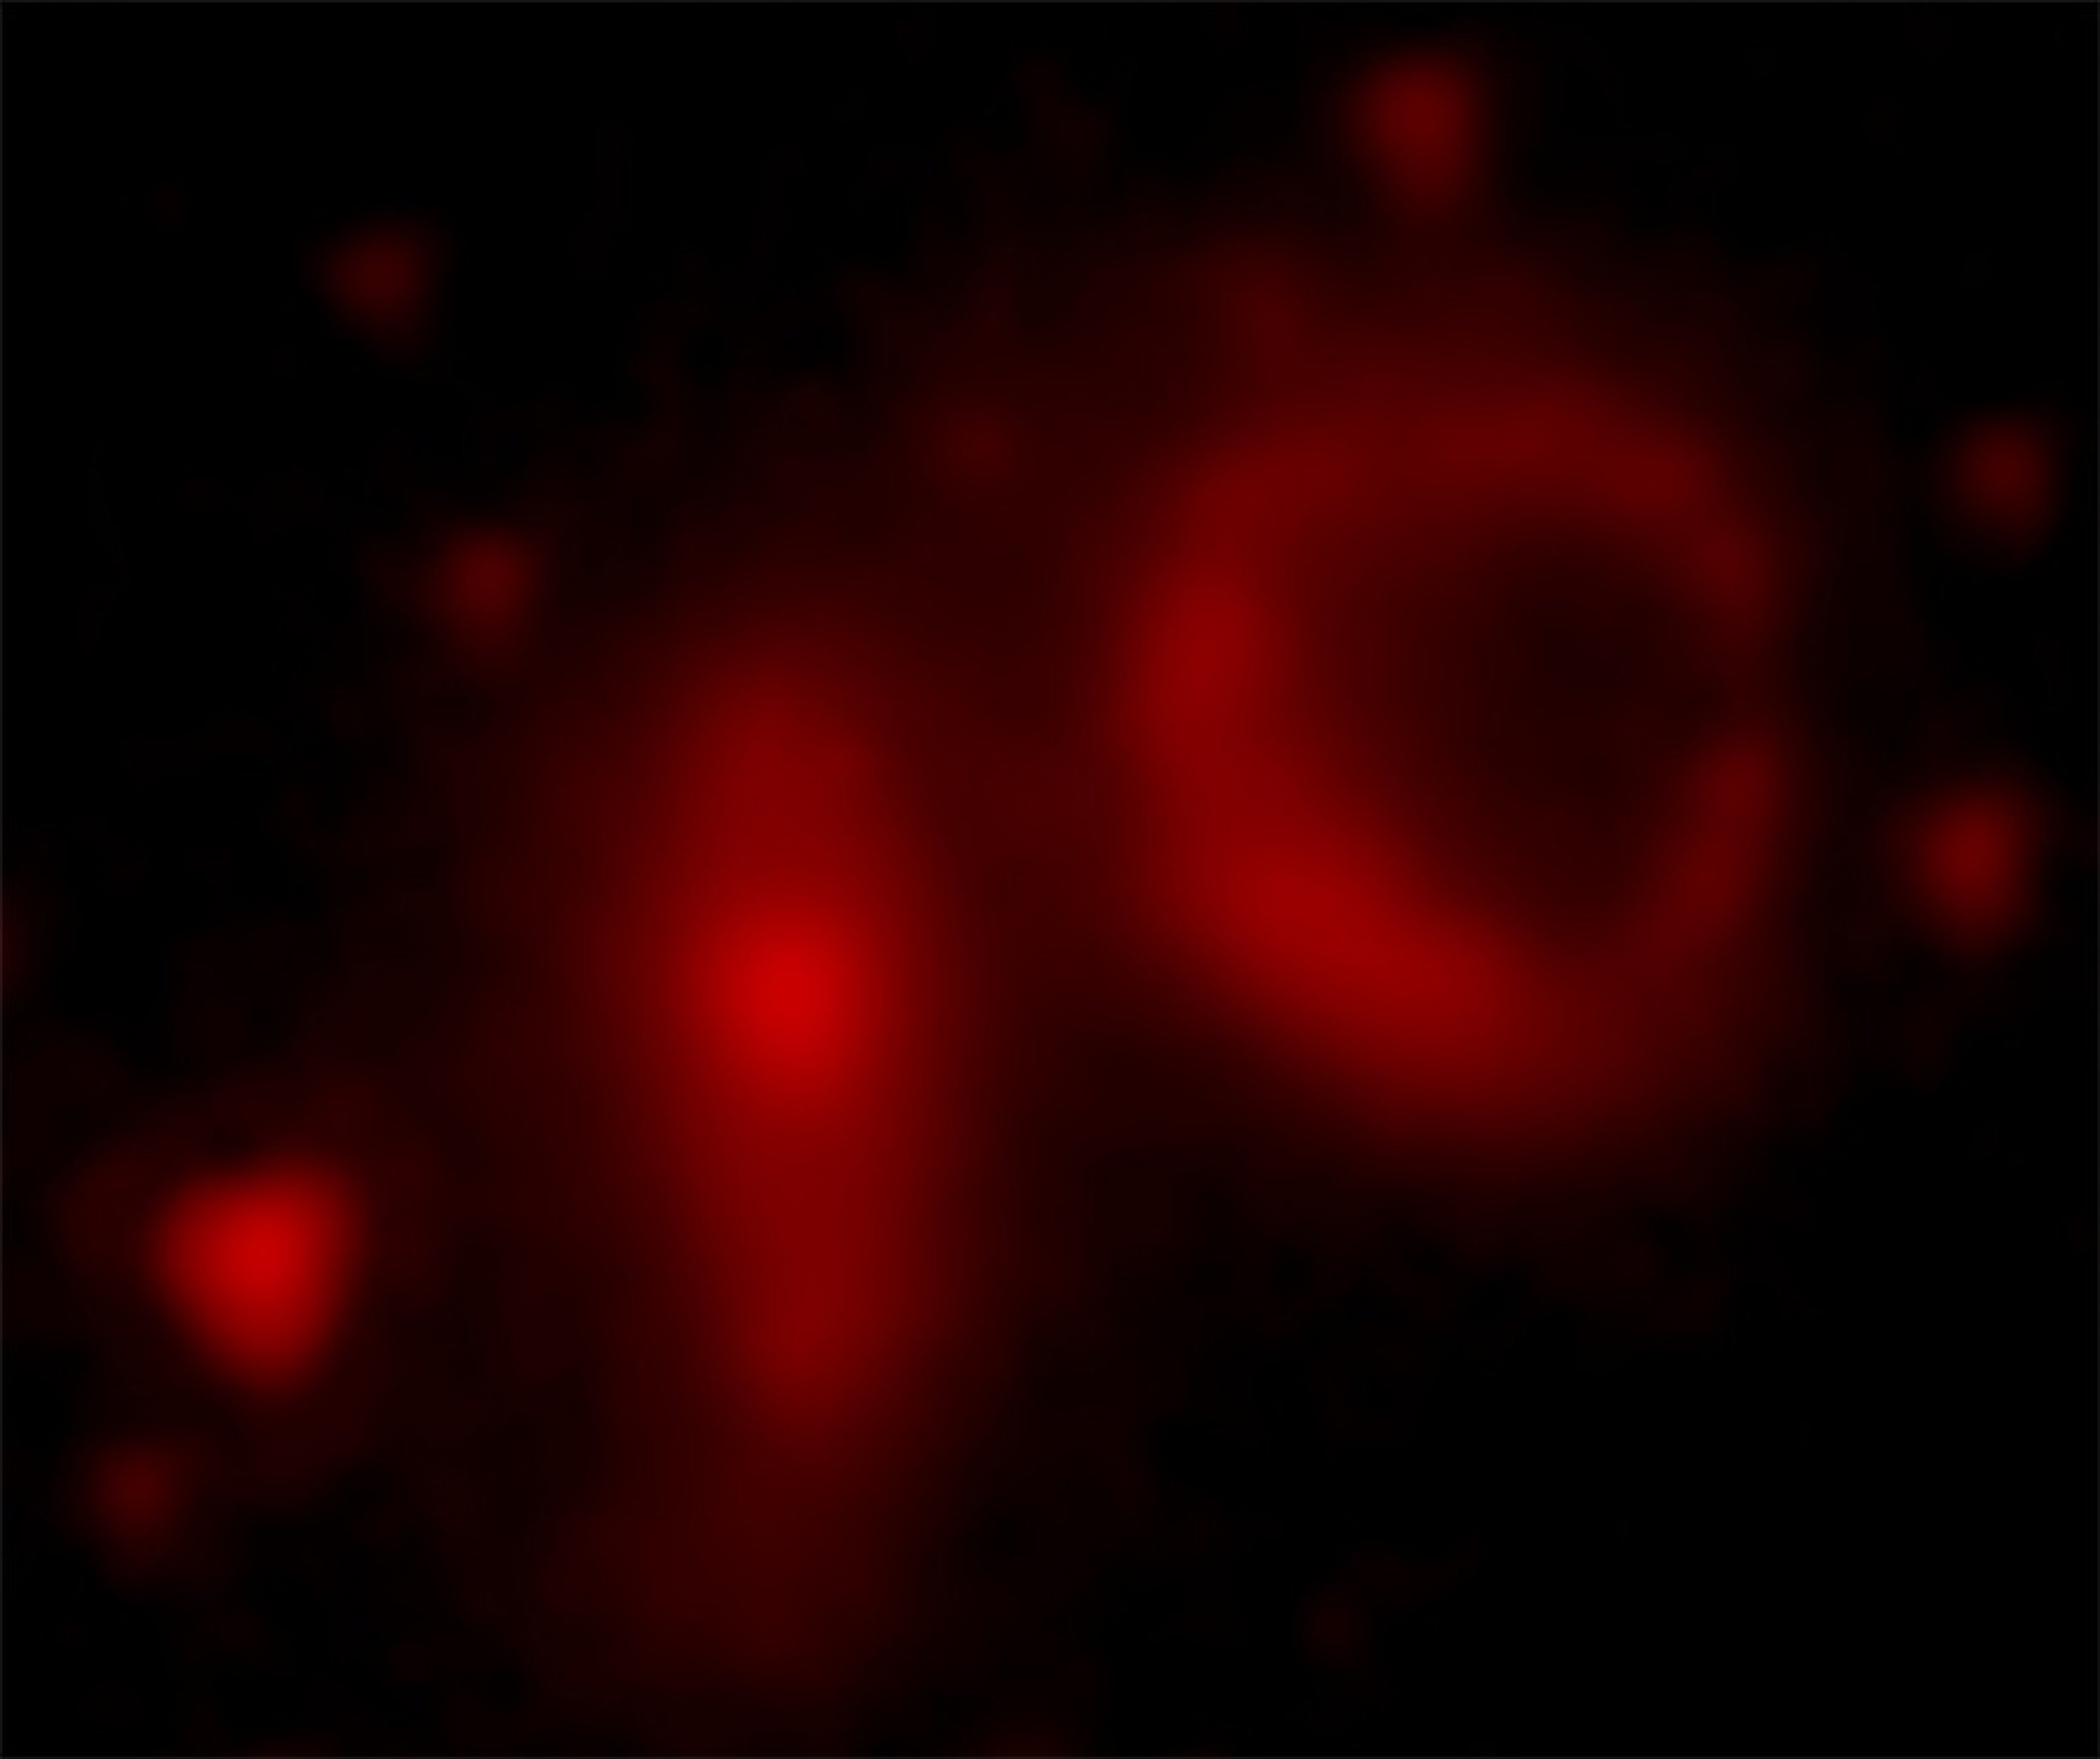 Infrared Image of Arp 147